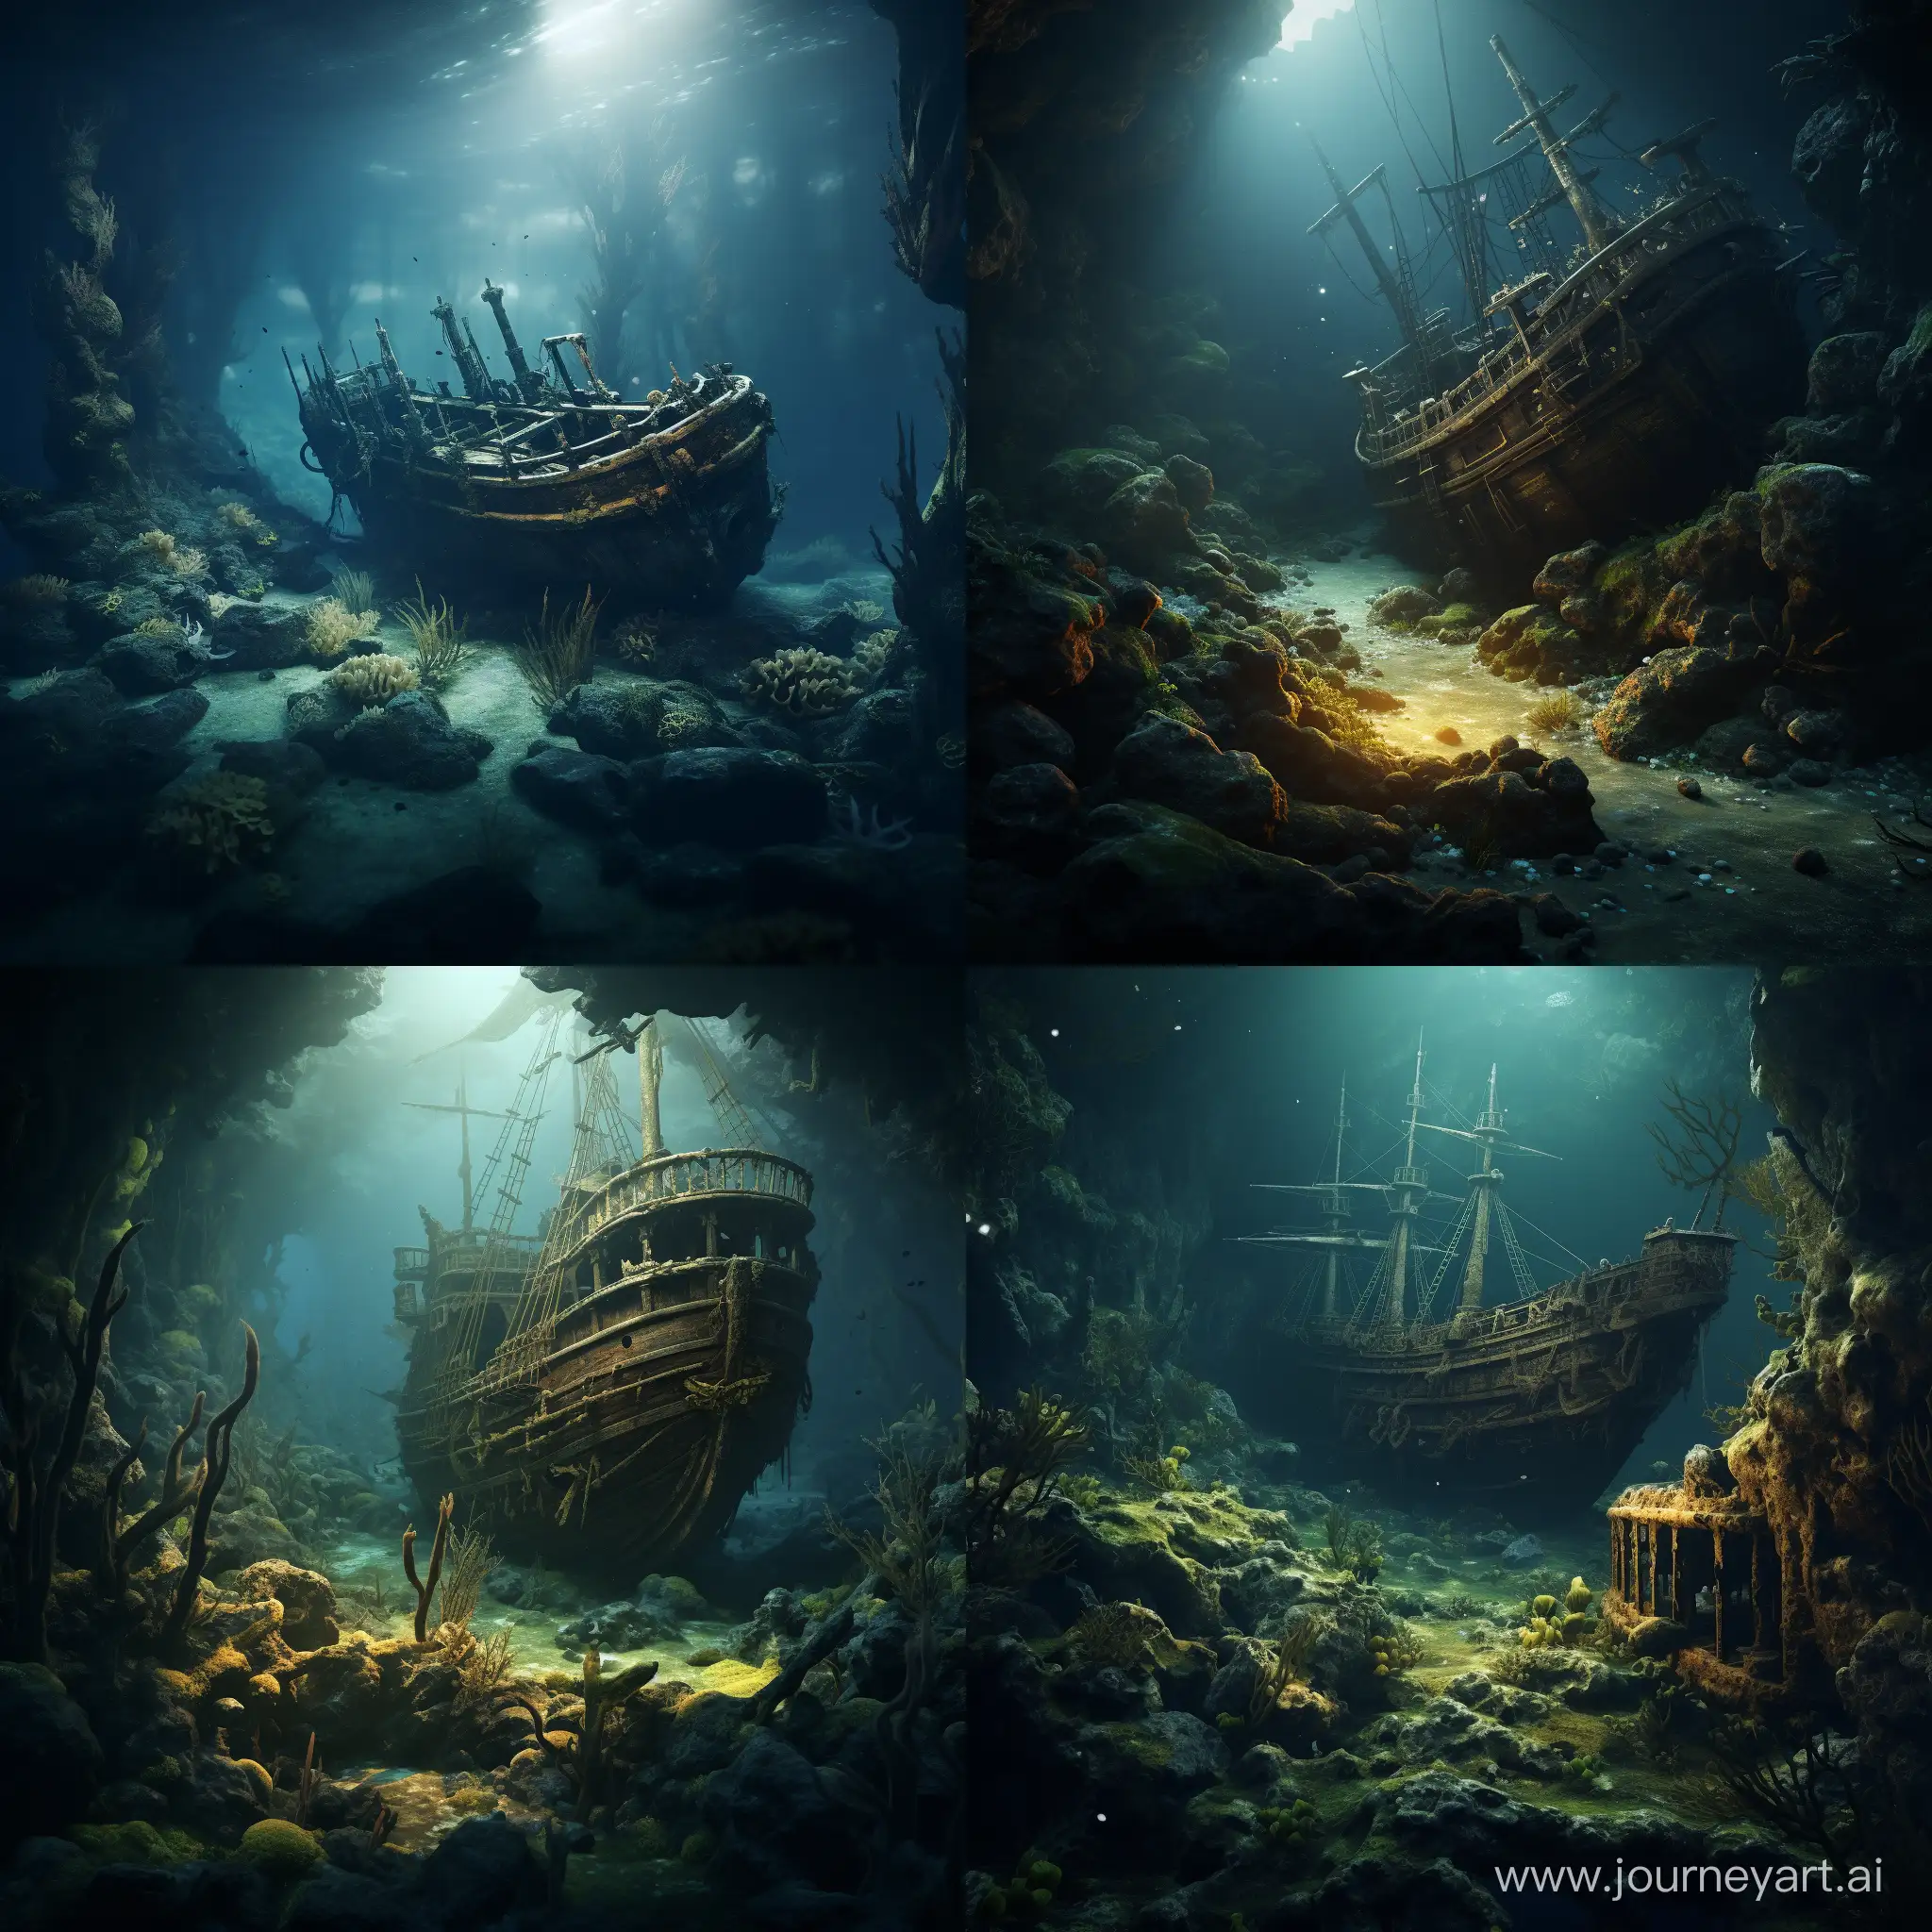 A realistic photo of an ancient shipwreck nestled on the ocean floor of a dark planet. marine plants have claimed the wooden structure, and fish swim in and out of its hollow spaces. Golden treasures and old bones are scattered around, providing a glimpse into the past. the place is dark and gloomy but hyper realistic